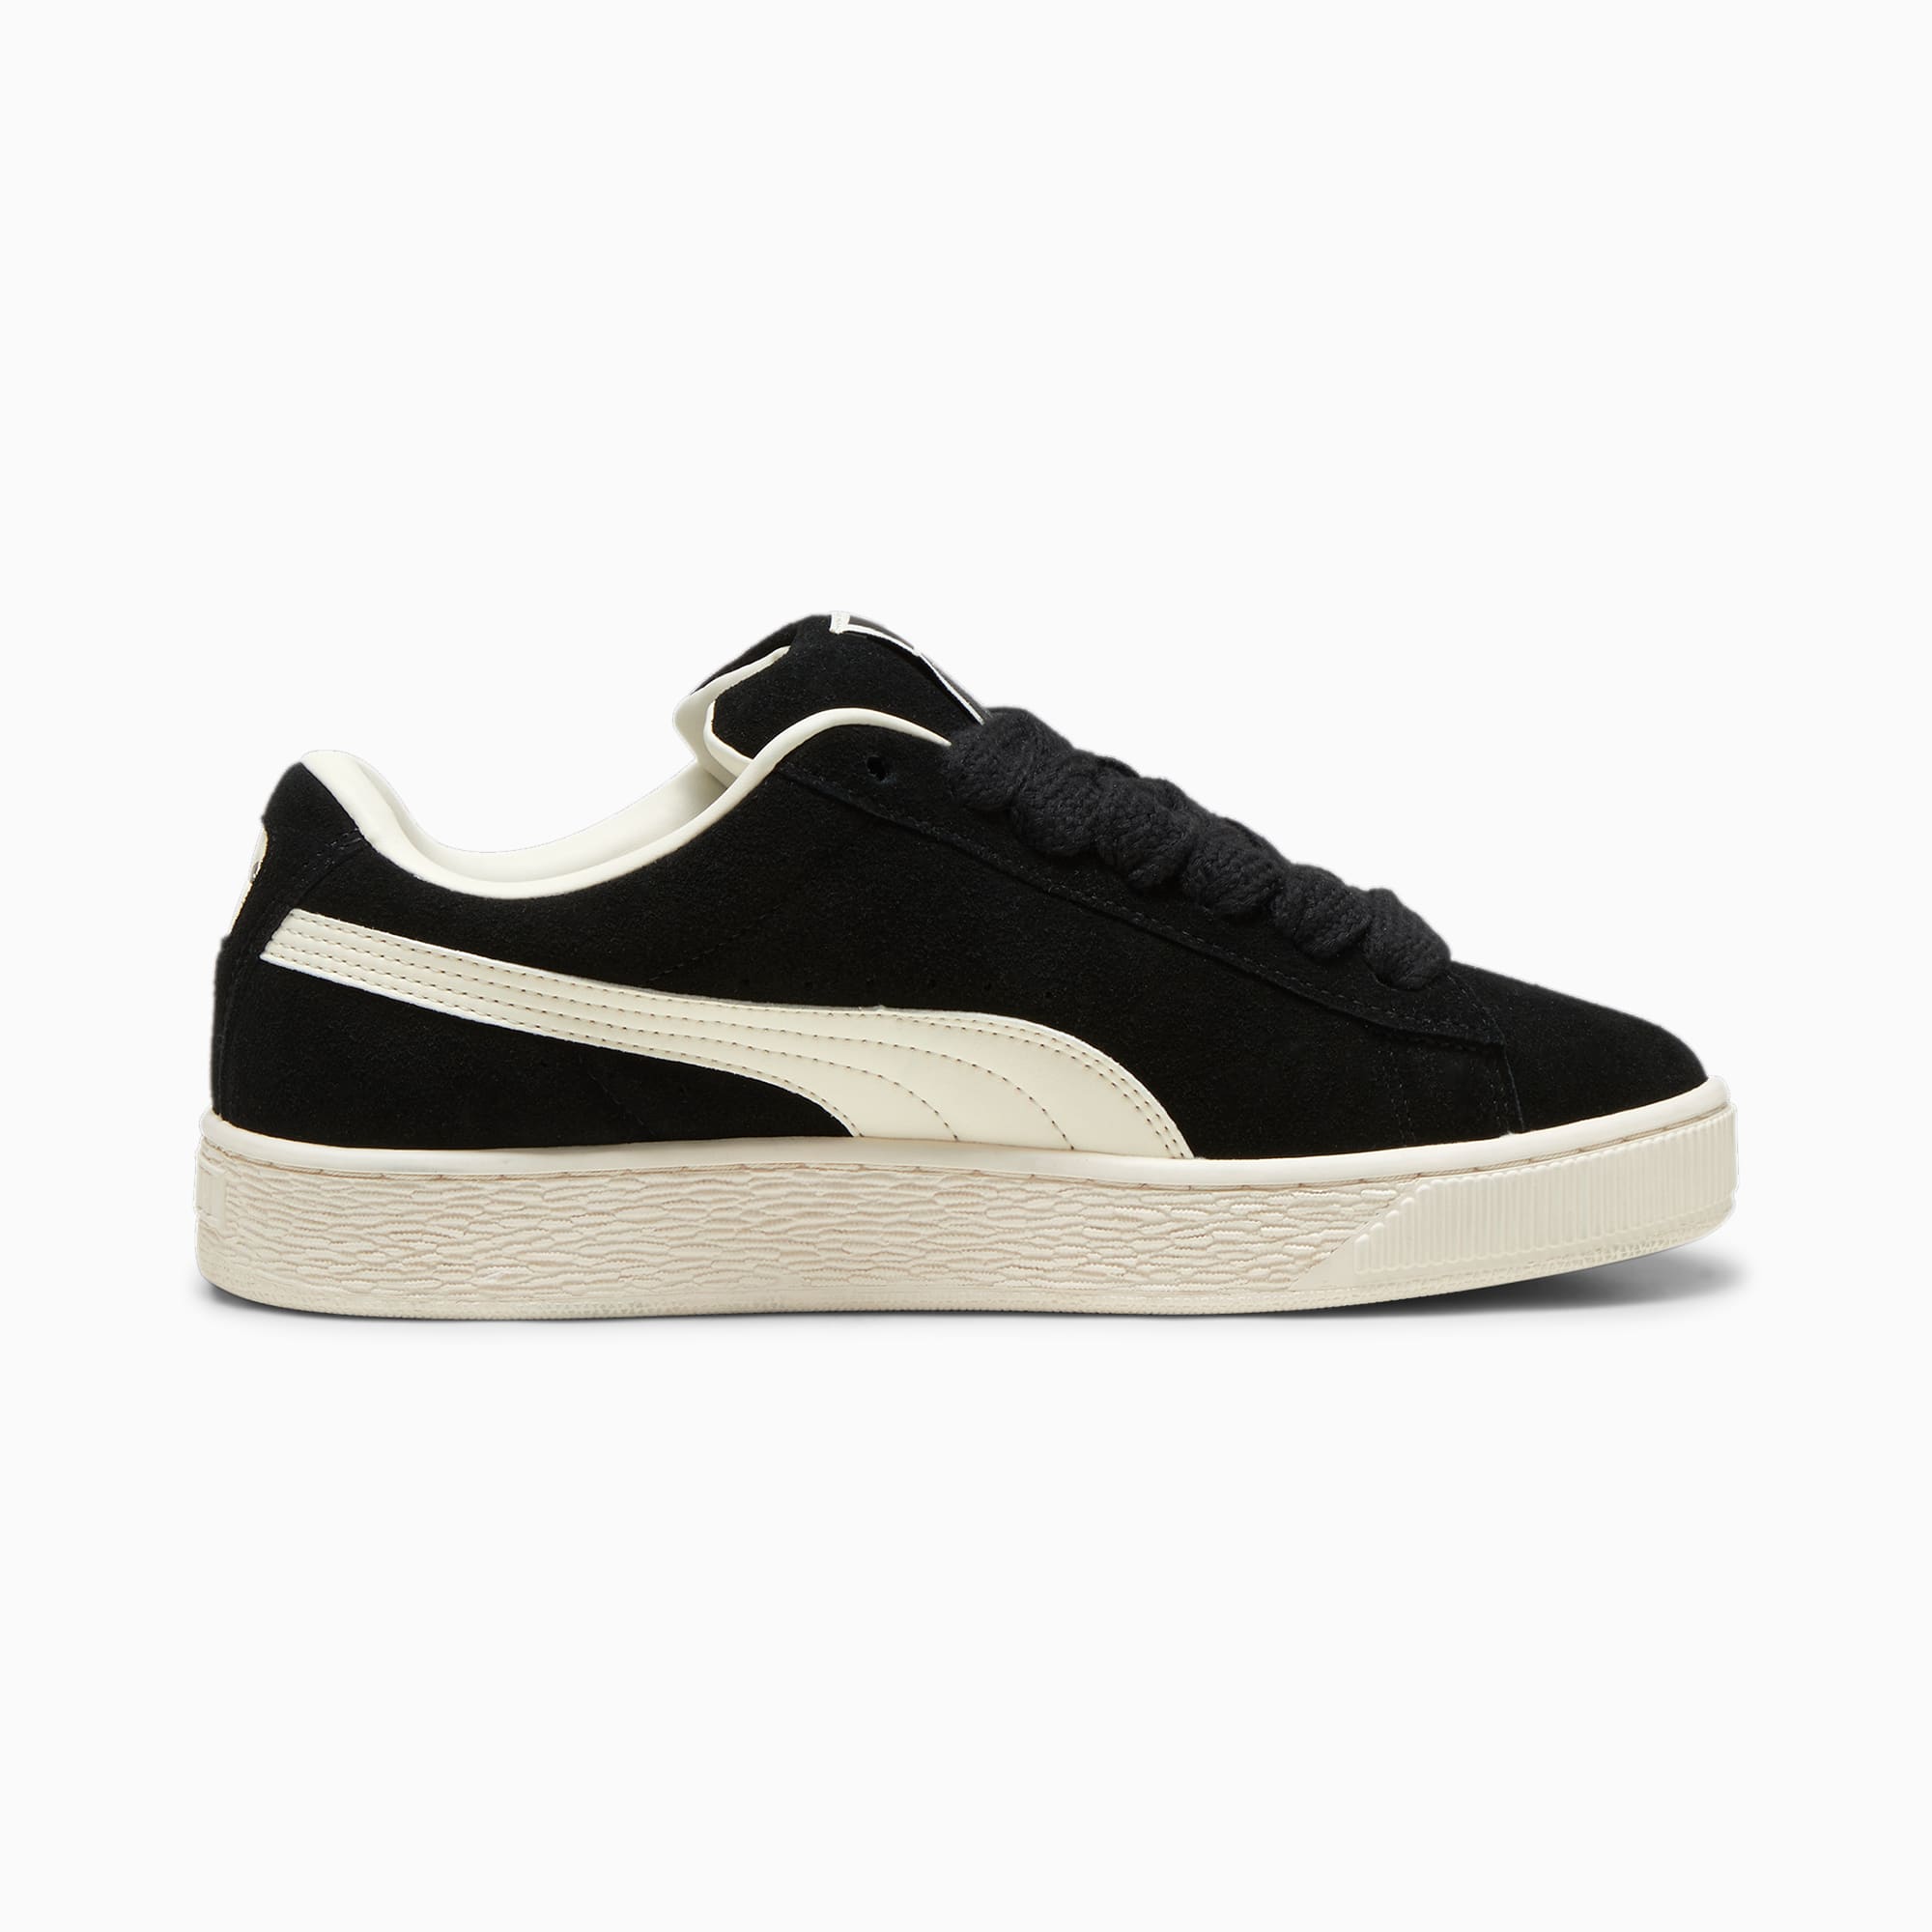 Women's PUMA X Pleasures Suede Xl Sneakers, Black/Frosted Ivory, Size 38,5, Shoes